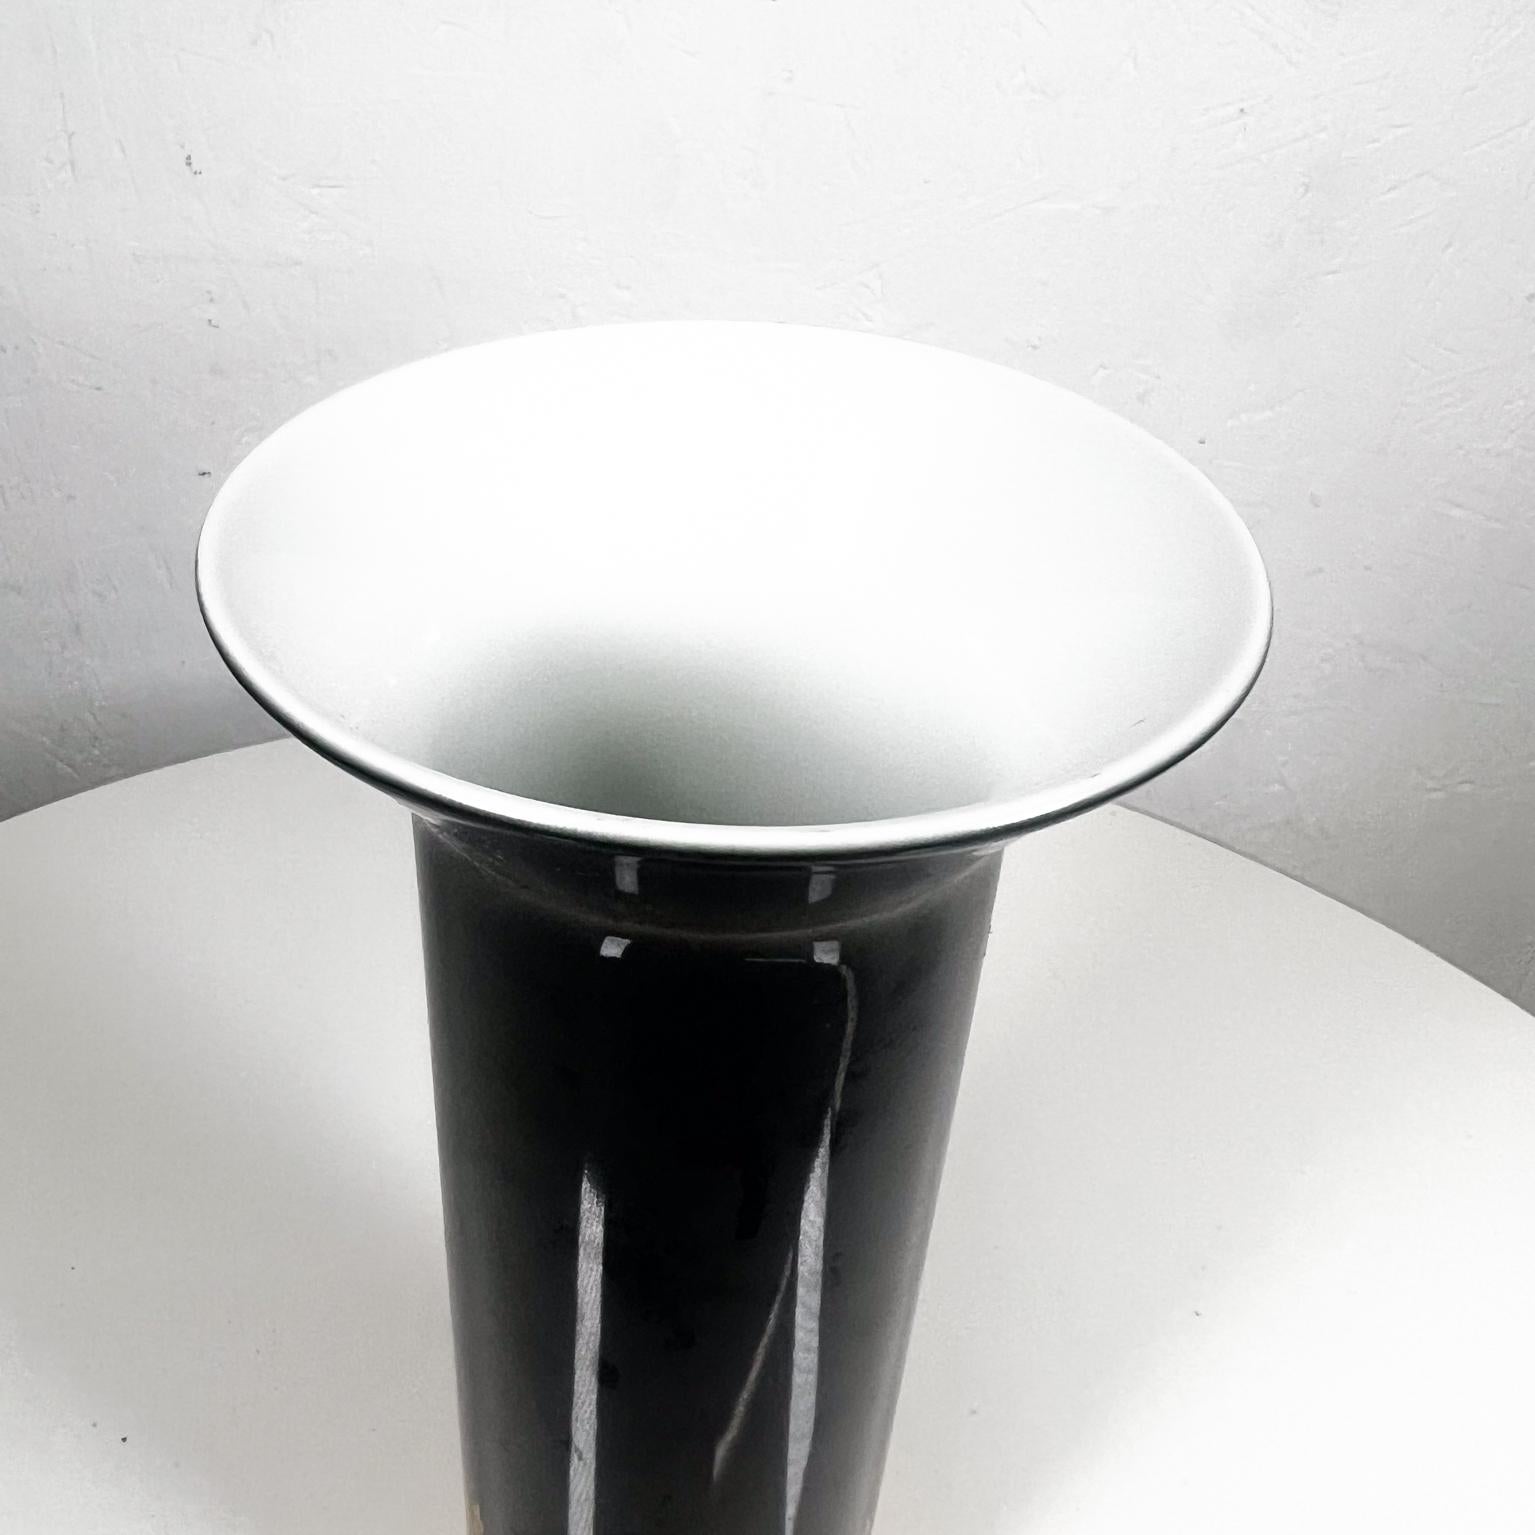 1960s Modernist Rosenthal Studio Vase Hans Theo Baumann Germany In Good Condition For Sale In Chula Vista, CA